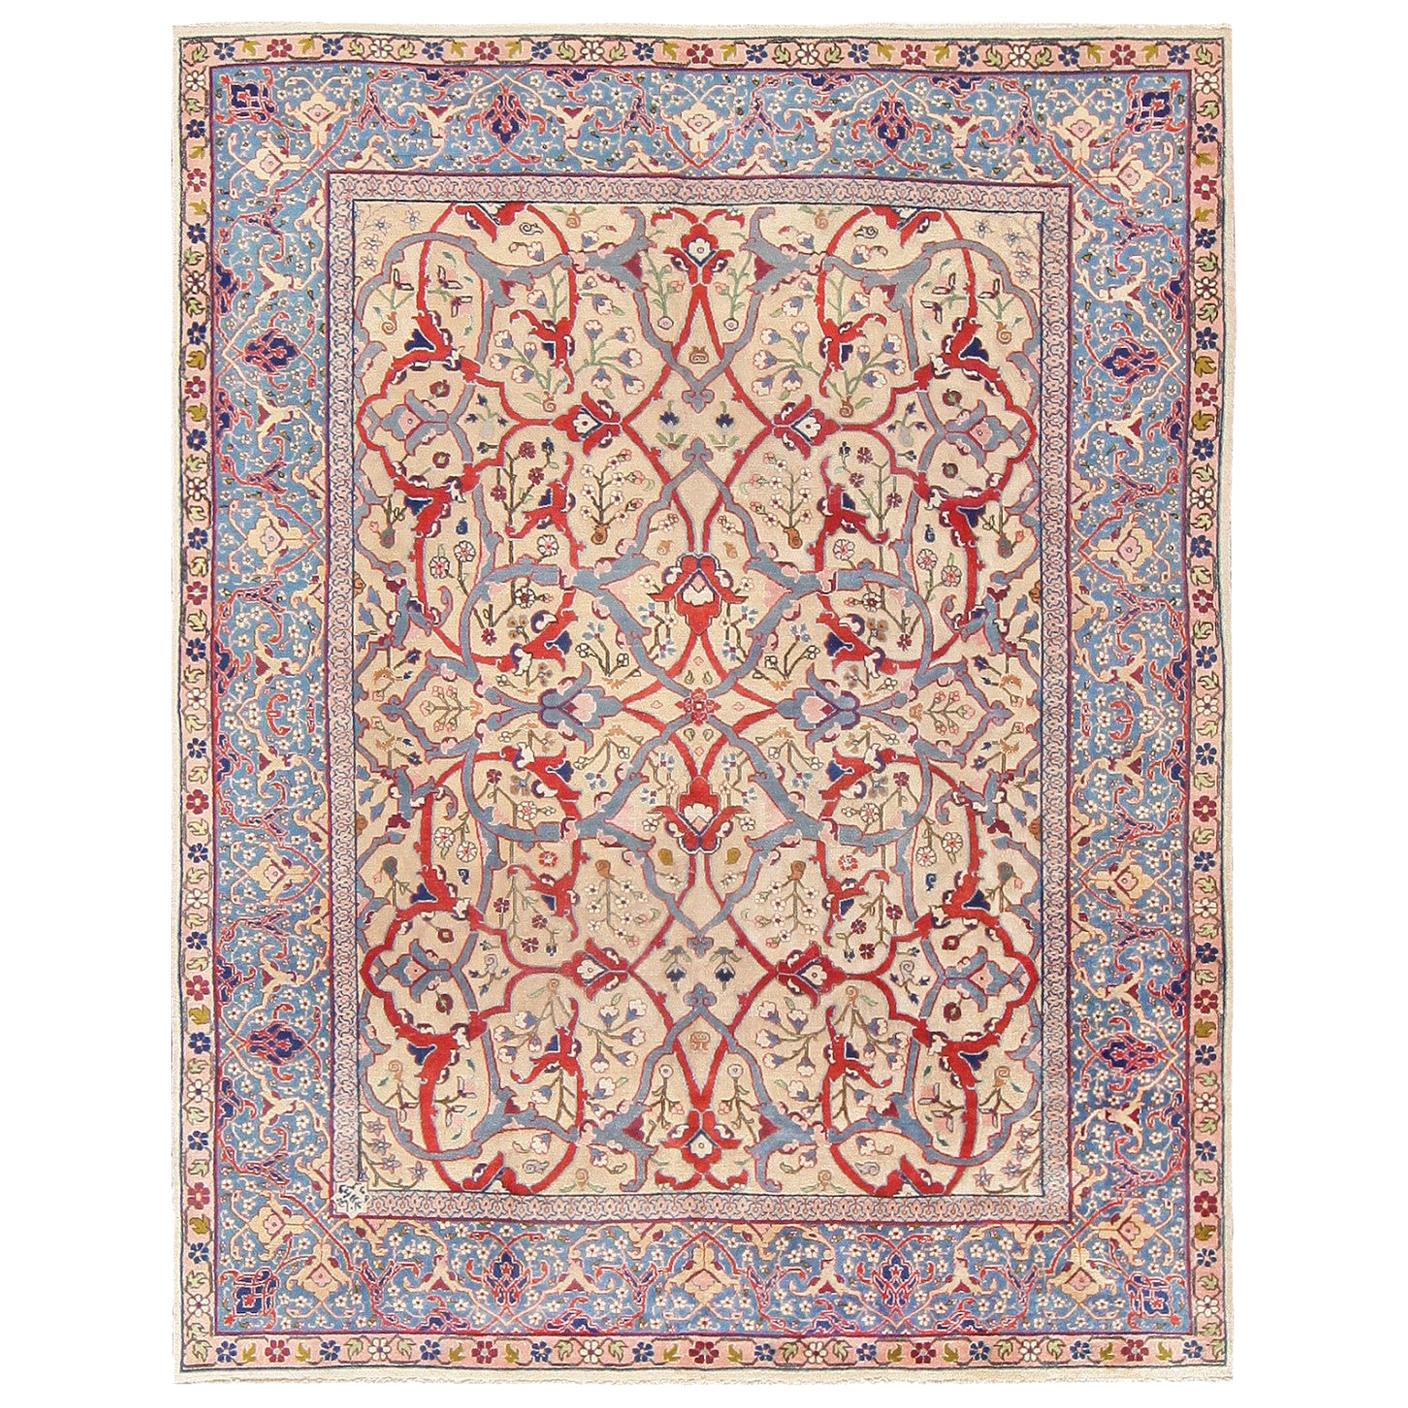 Nazmiyal Collection Antique Persian Tabriz Rug. Size: 7 ft 10 in x 10 ft 2 in 